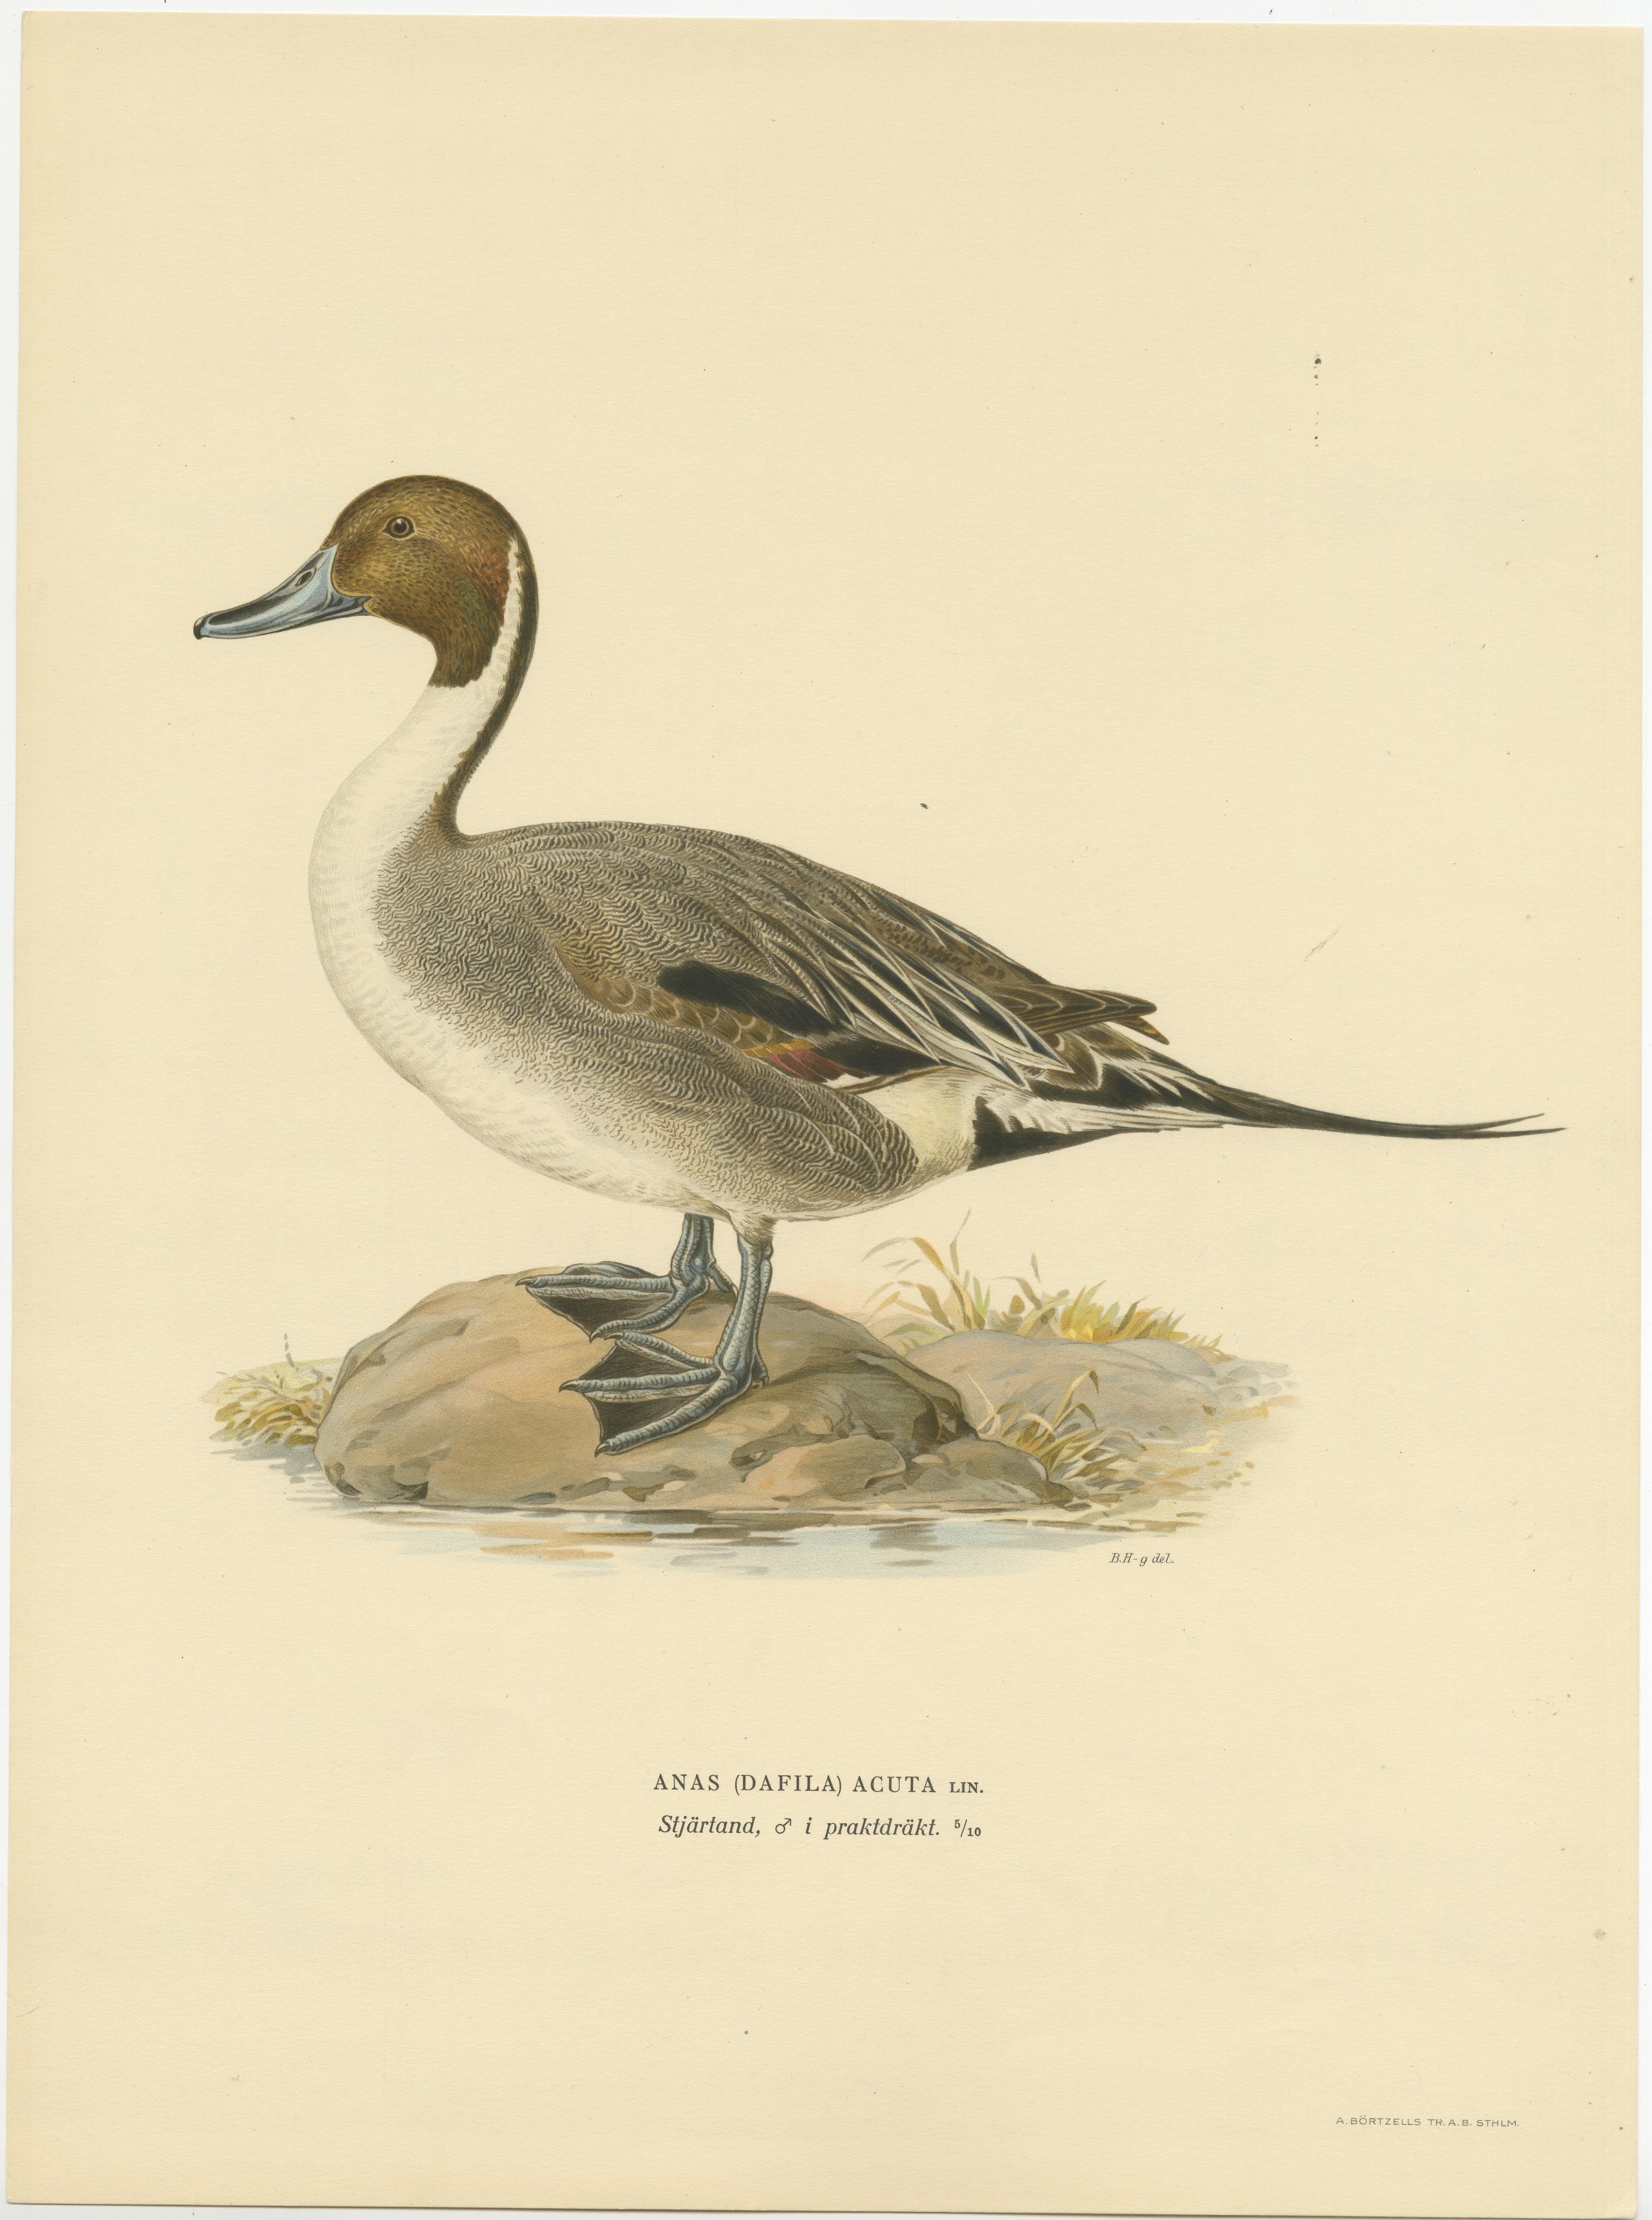 The image is a vintage ornithological illustration titled 'Anas (Dafila) Acuta', depicting the northern pintail, a graceful and slender duck known for its elegant lines and long tail feathers. This particular print is sourced from the work 